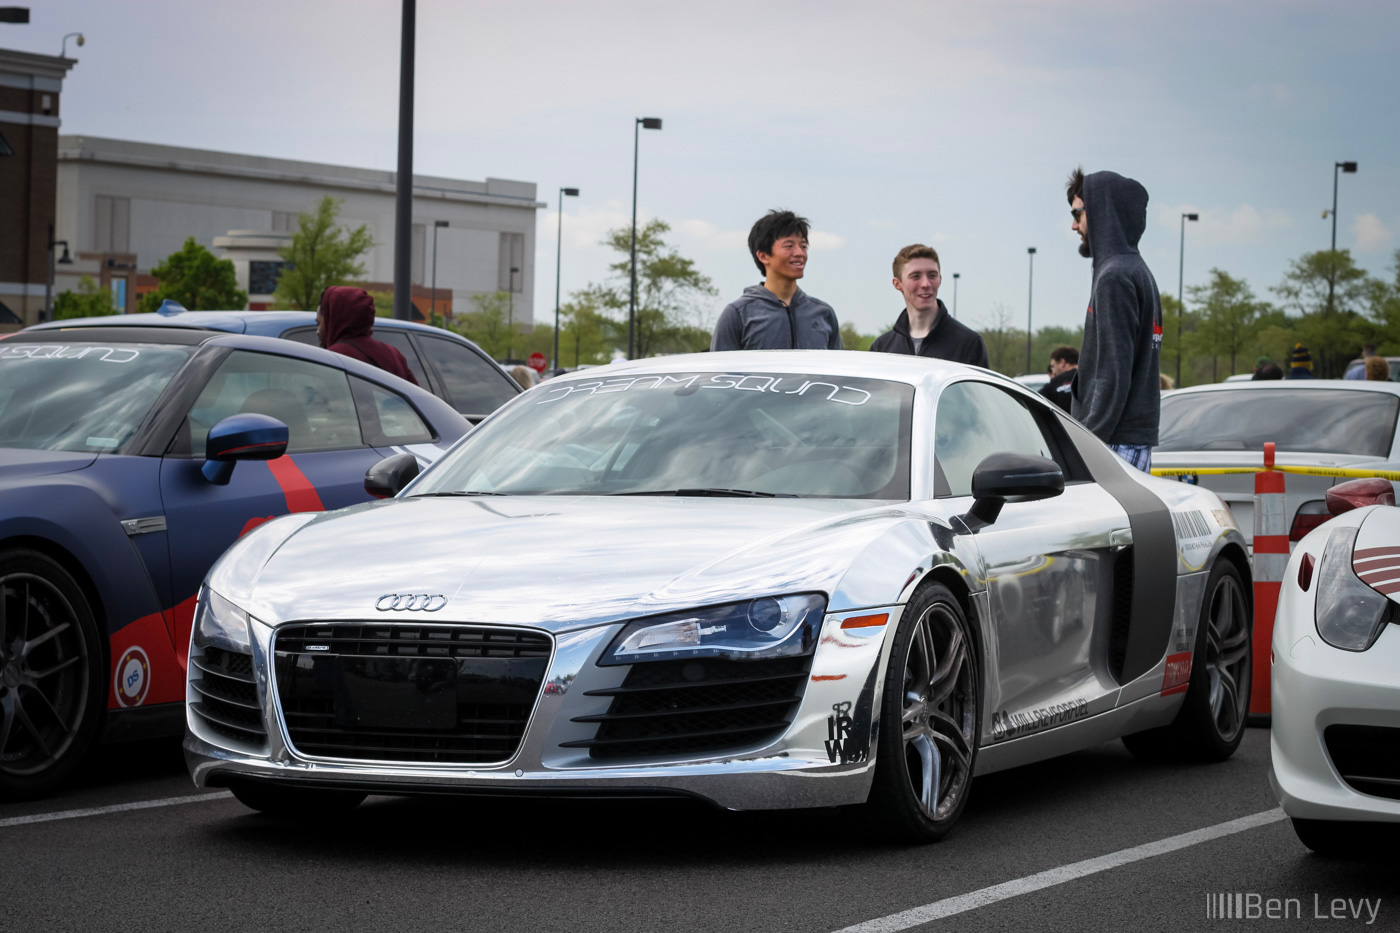 Audi R8 with reflective wrap